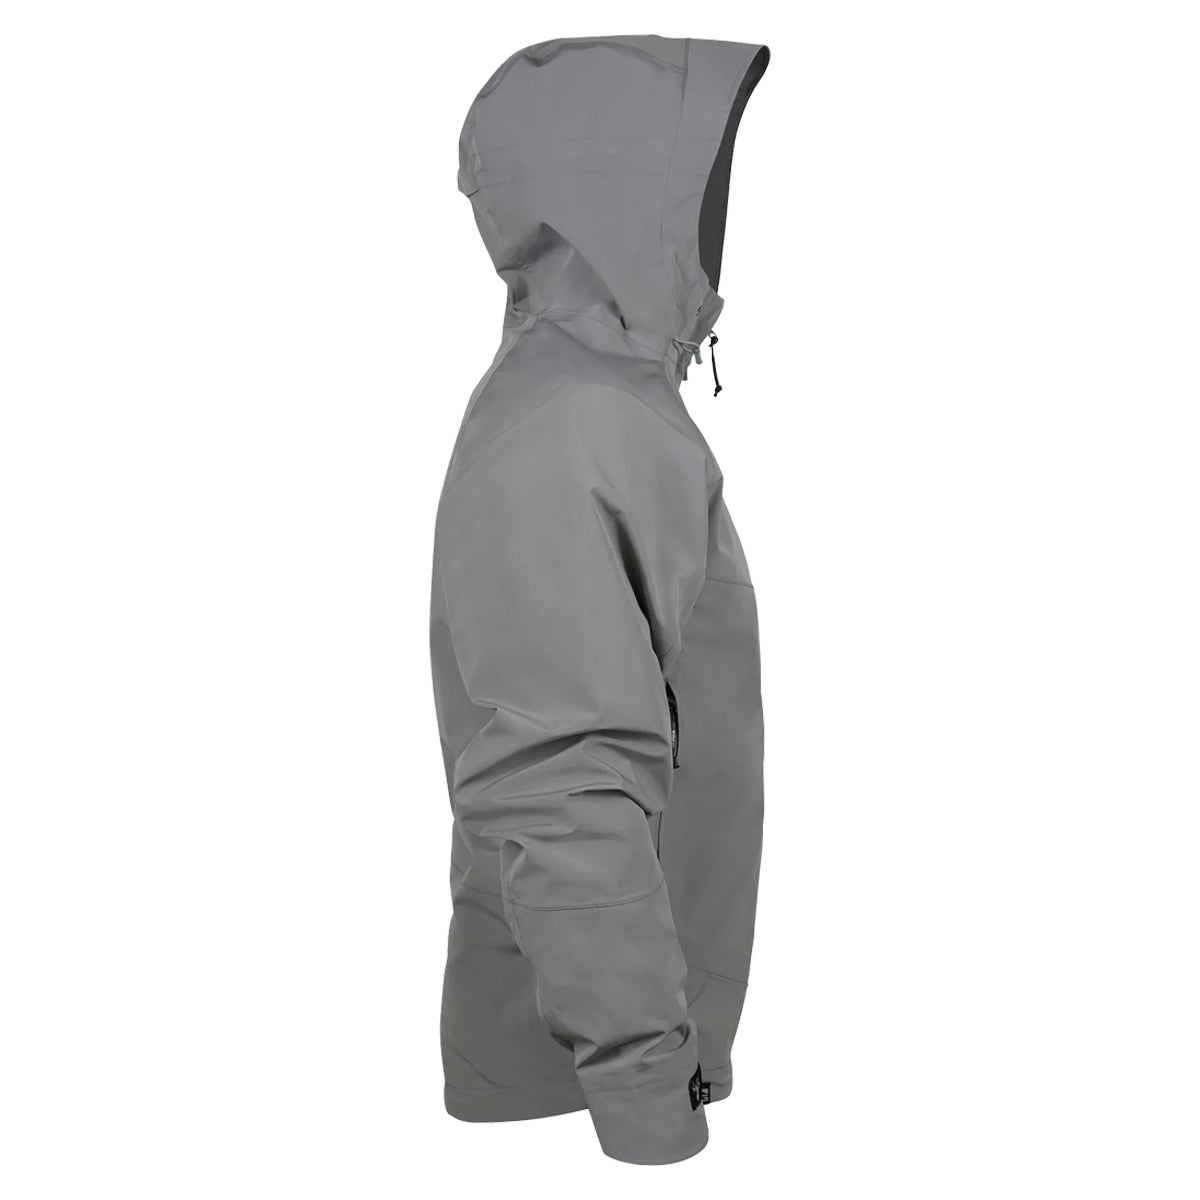 King's XKG Paramount Rain Jacket in Charcoal by GOHUNT | King's - GOHUNT Shop